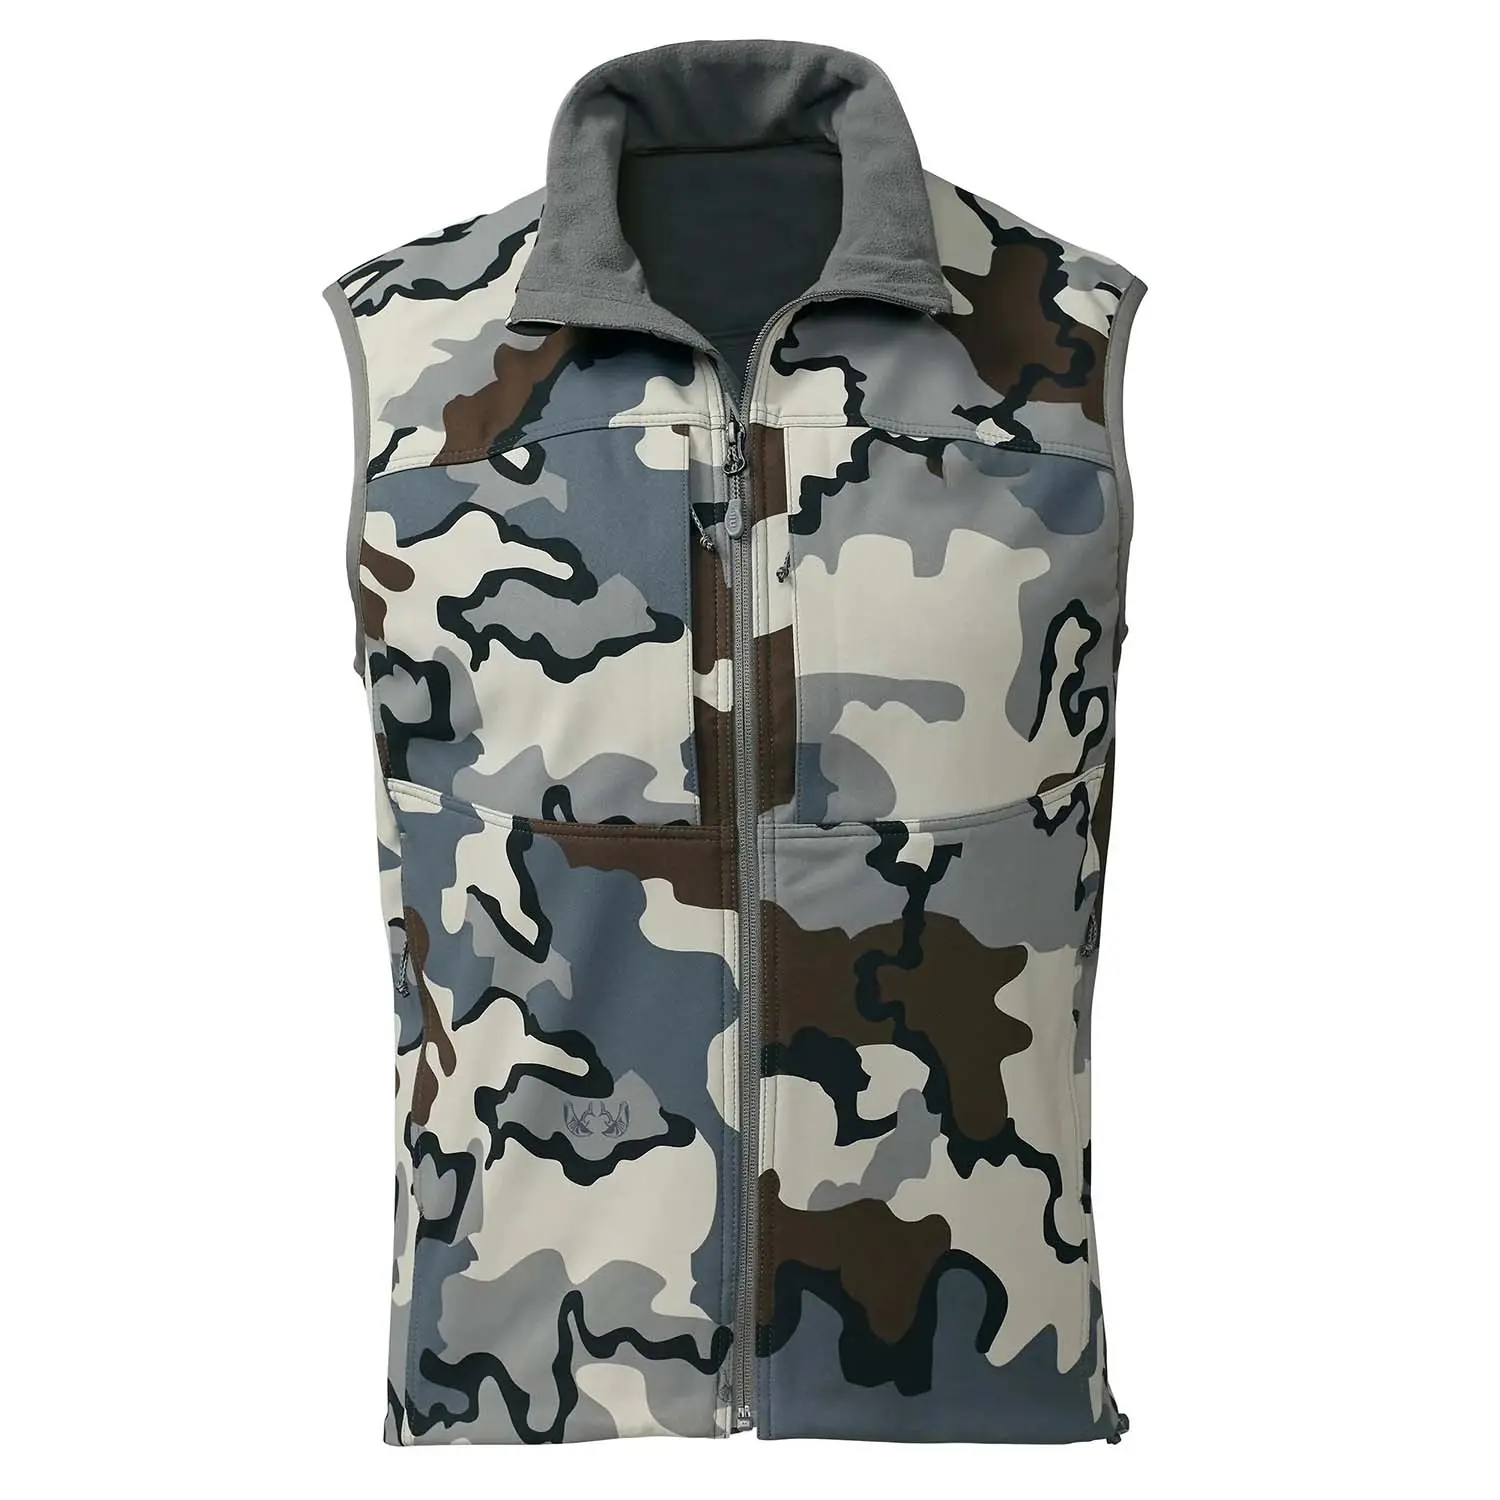 Latest Arrival Multi Pocket Classic Style Outdoor Wild Animal Hunting Vest Smooth Breathable Hunting Camo Vest